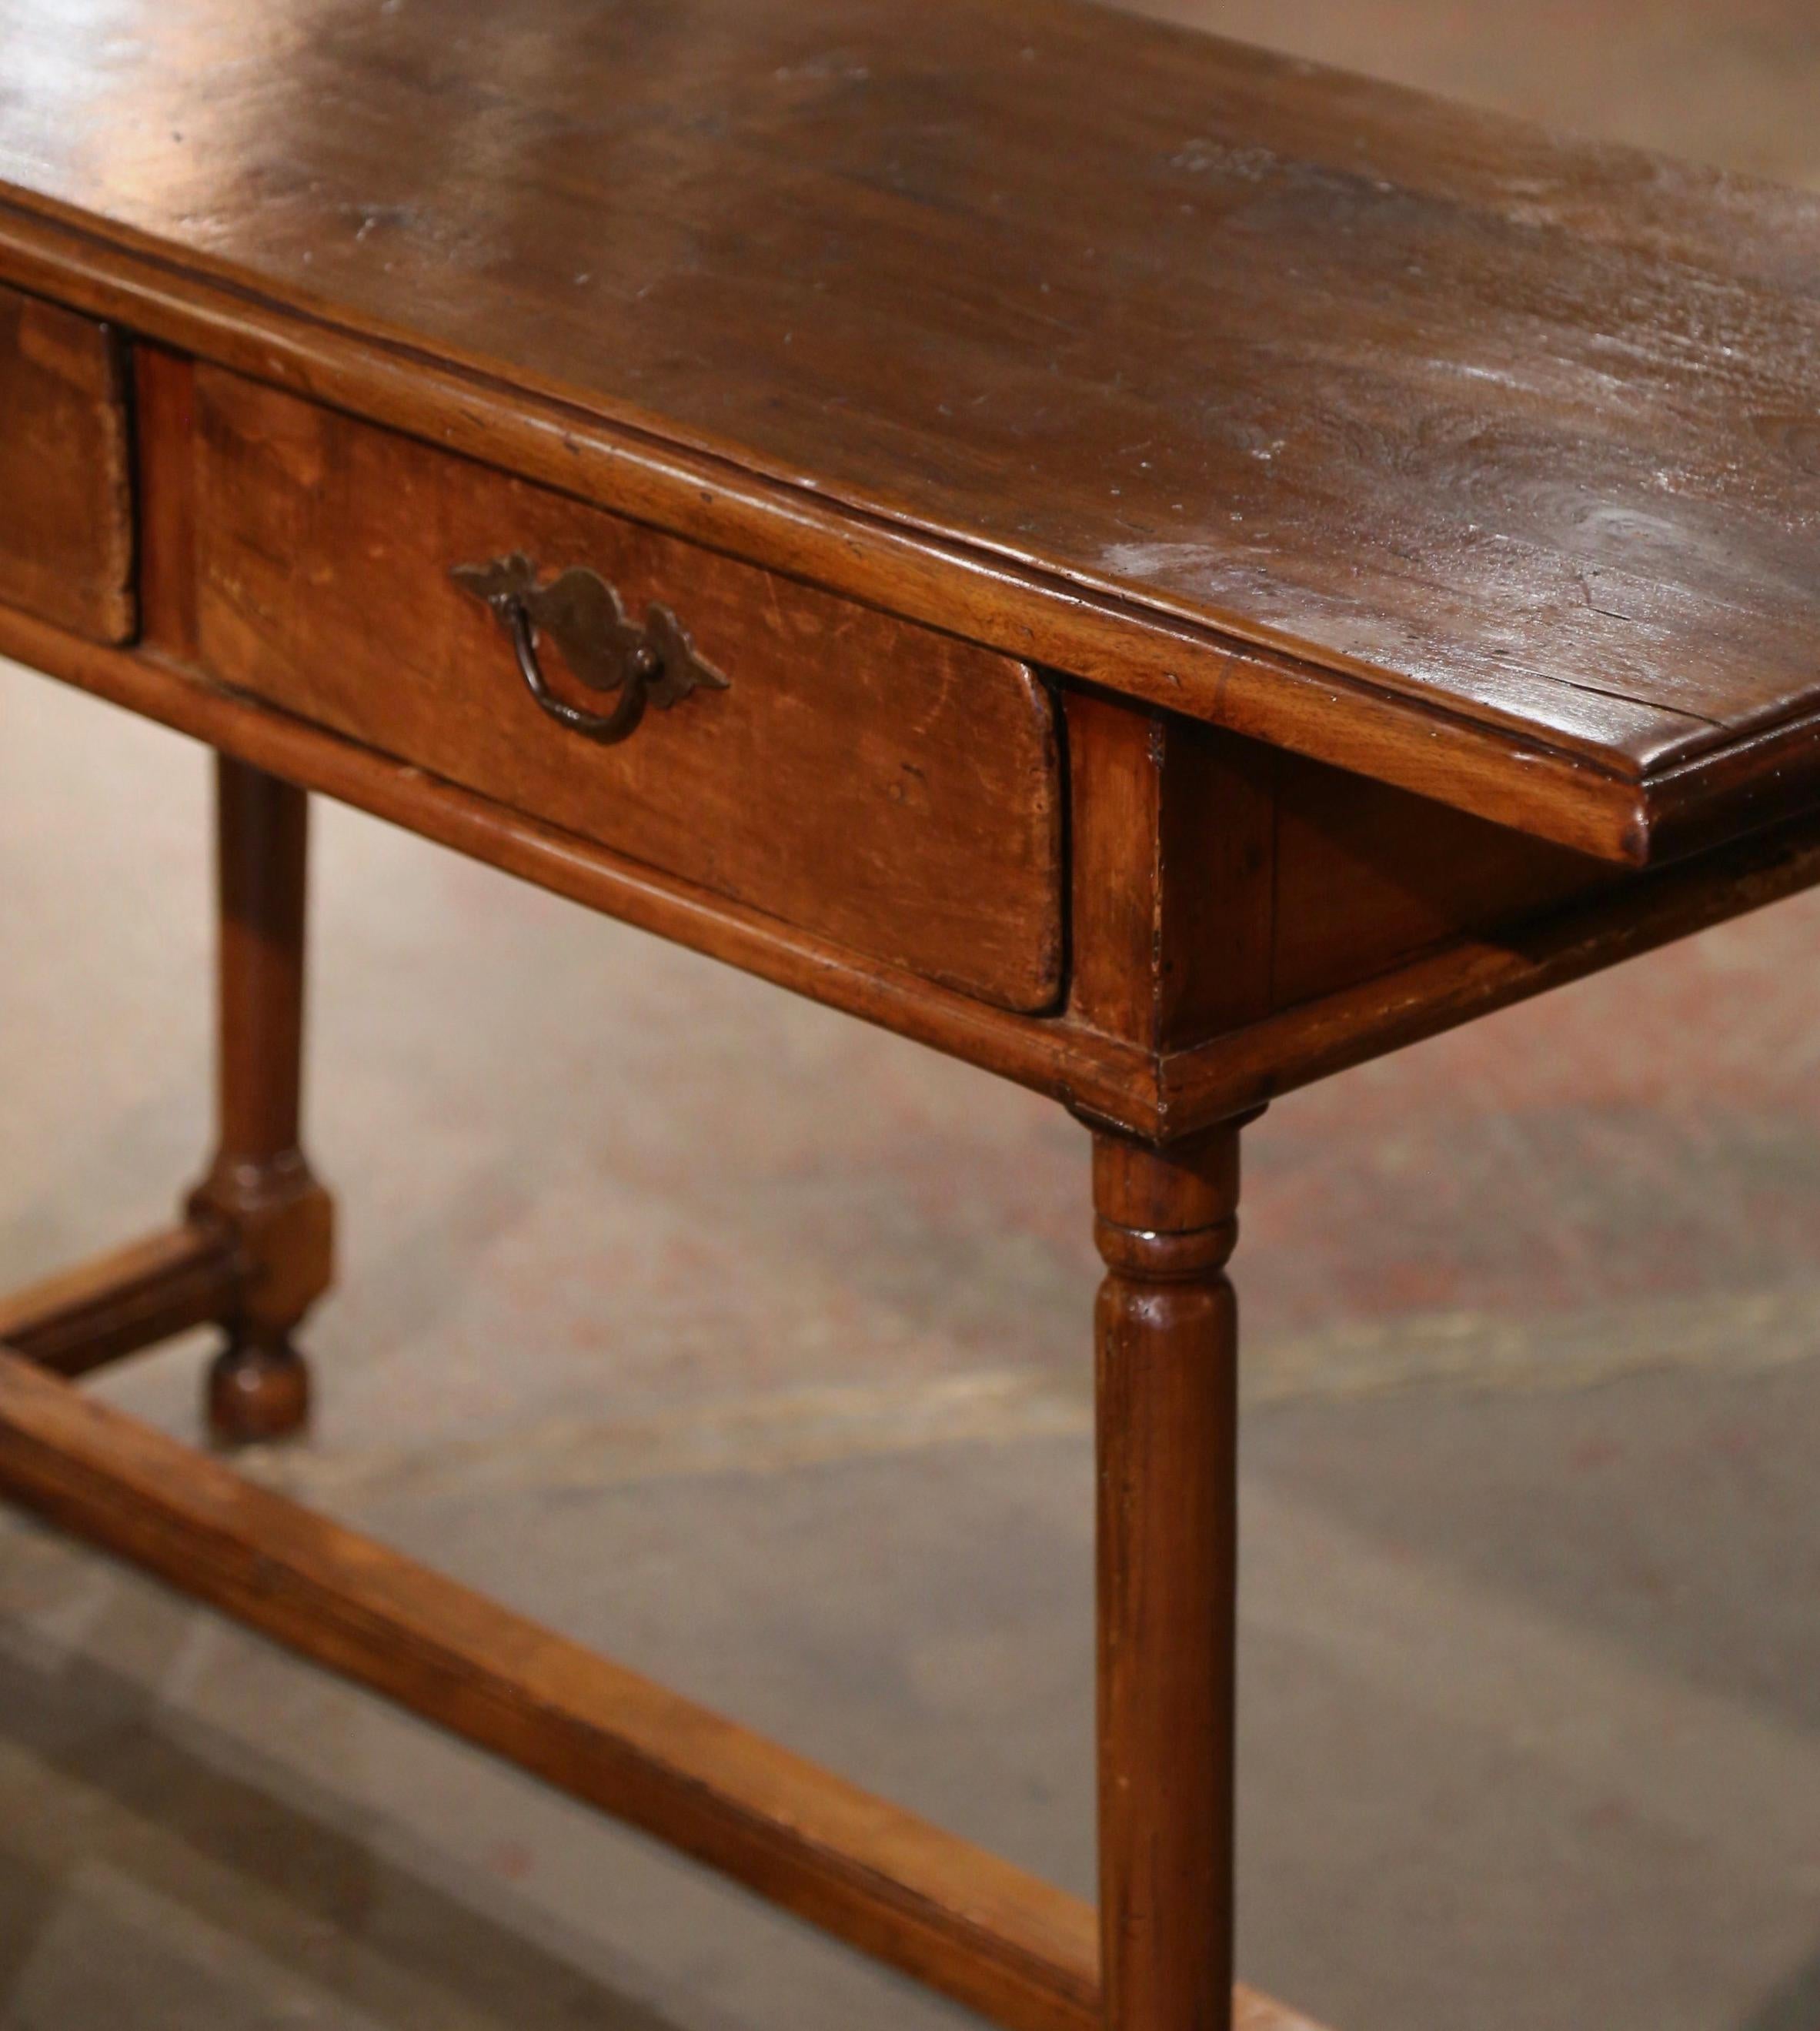 Mid-19th Century French Empire Walnut Console Table with Drawers For Sale 3